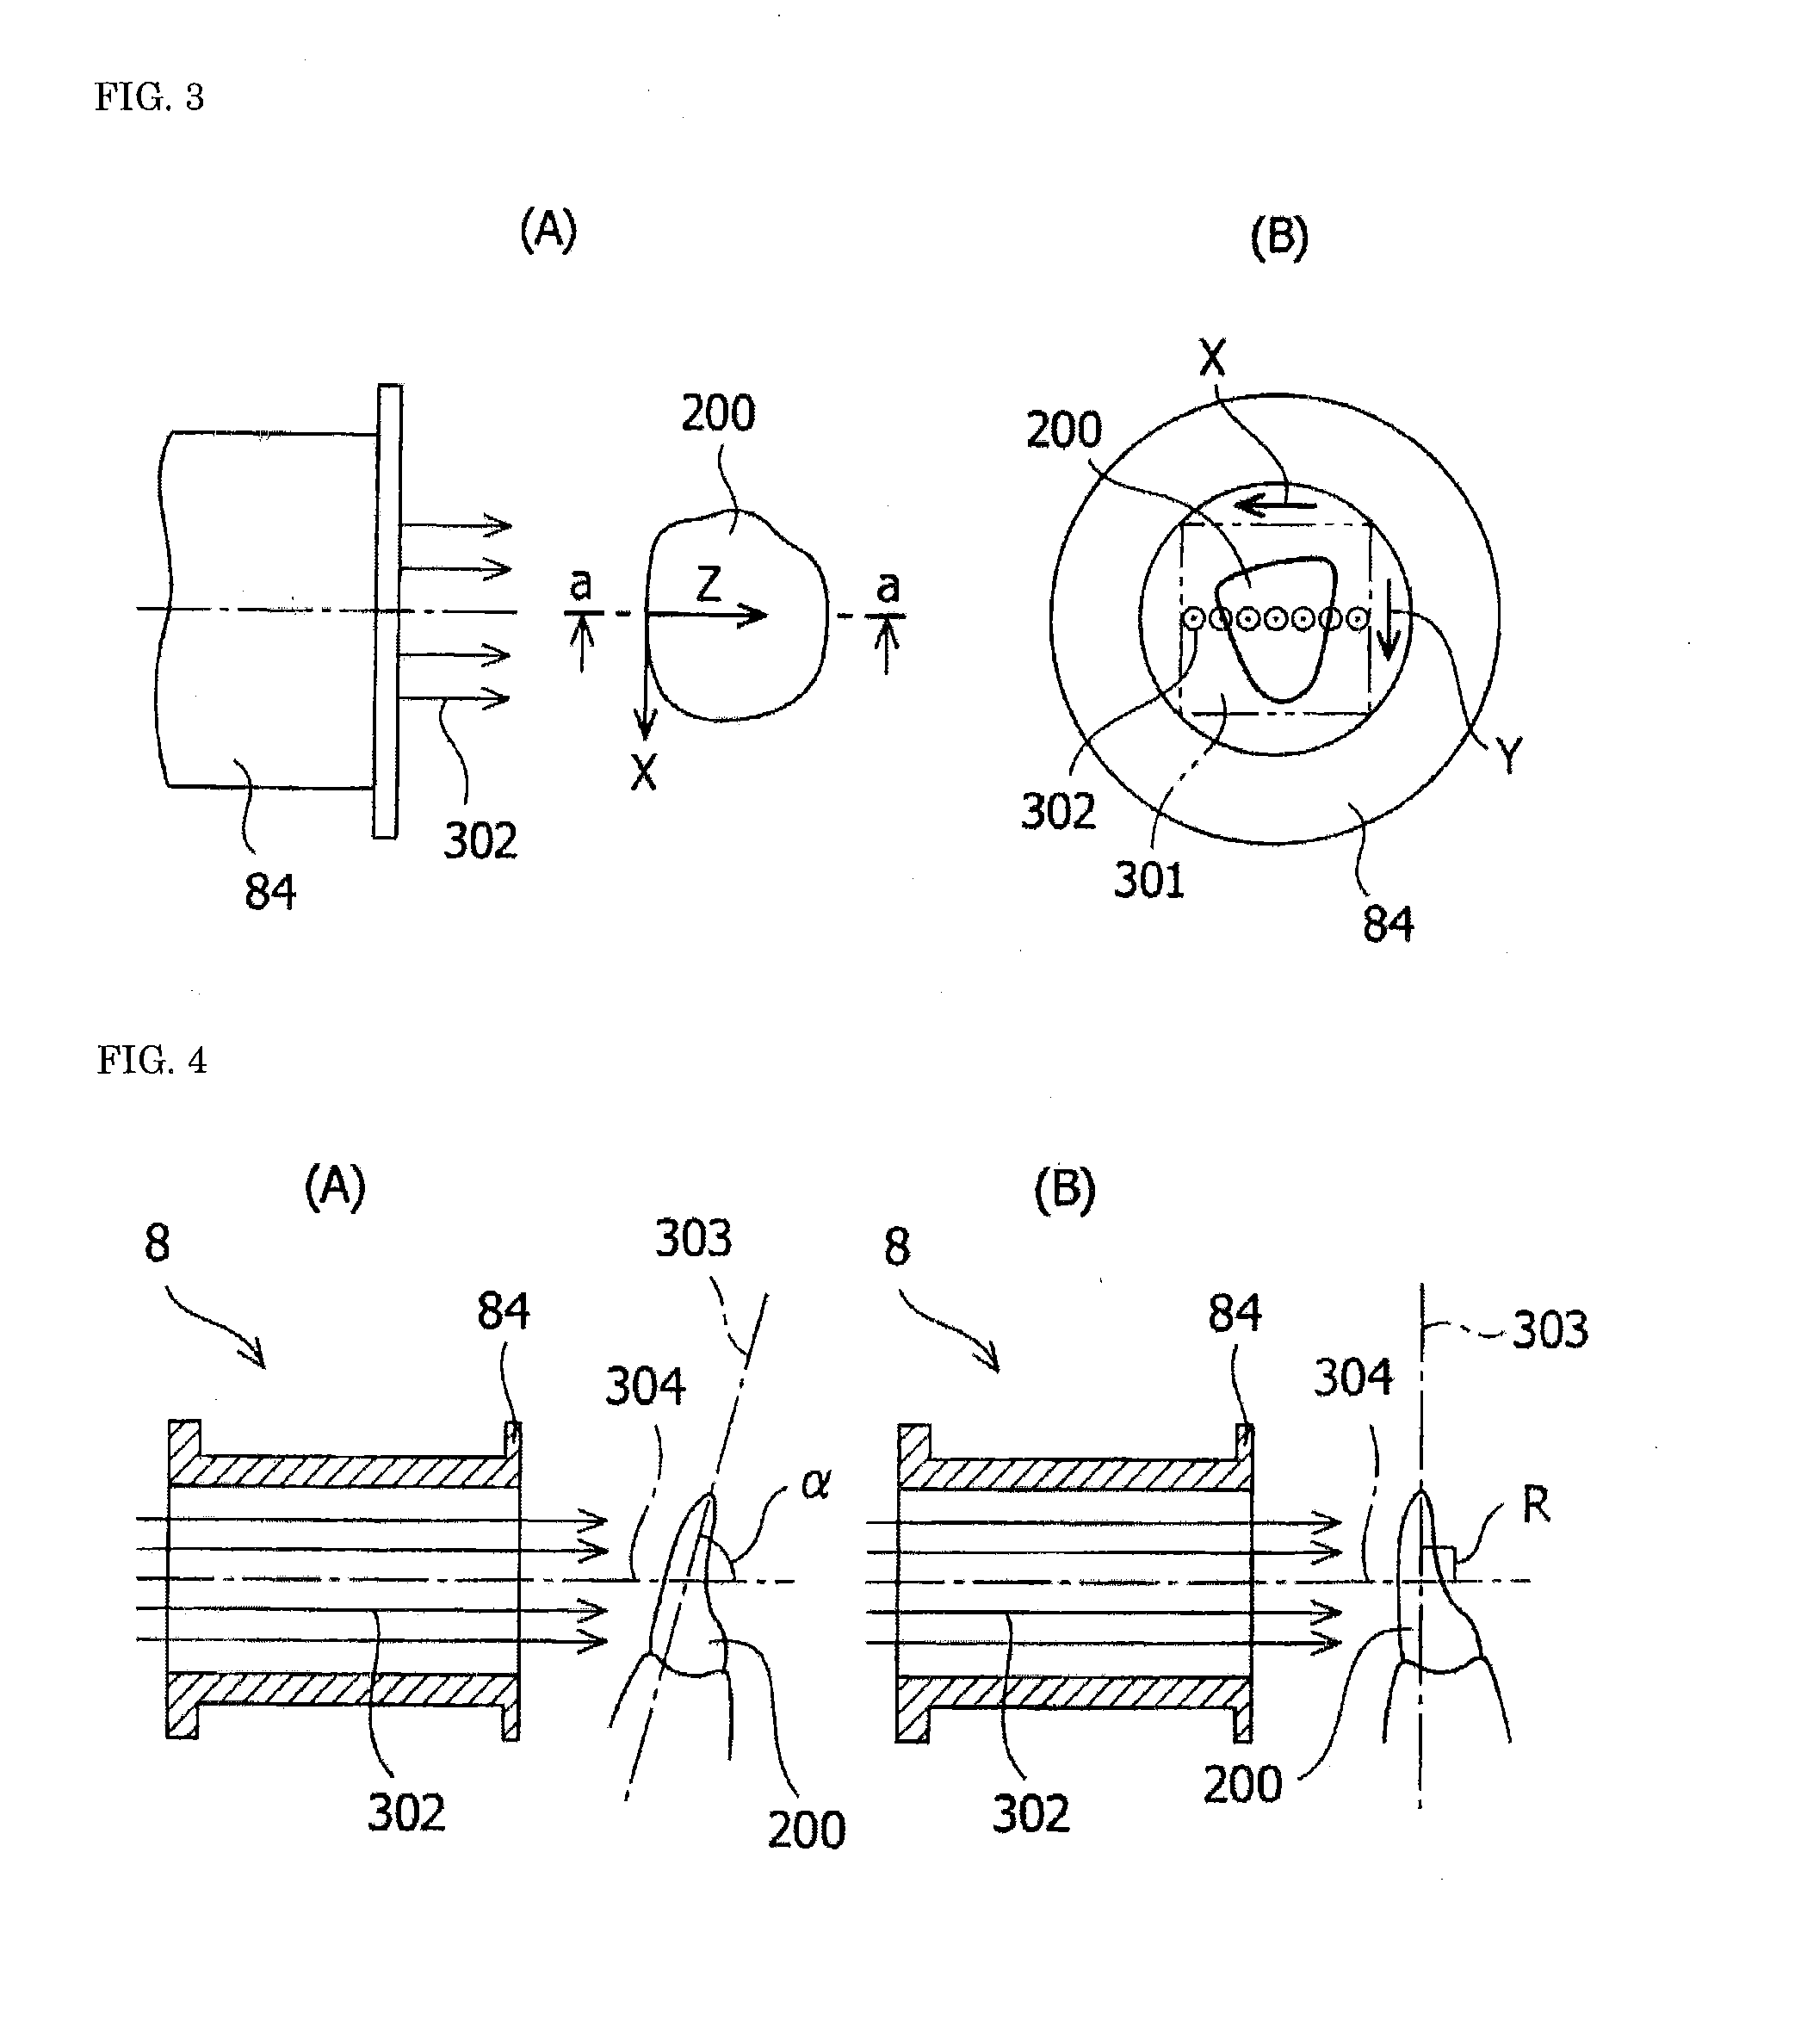 Method and apparatus for measuring and displaying dental plaque, gingiva, and alveolar bone